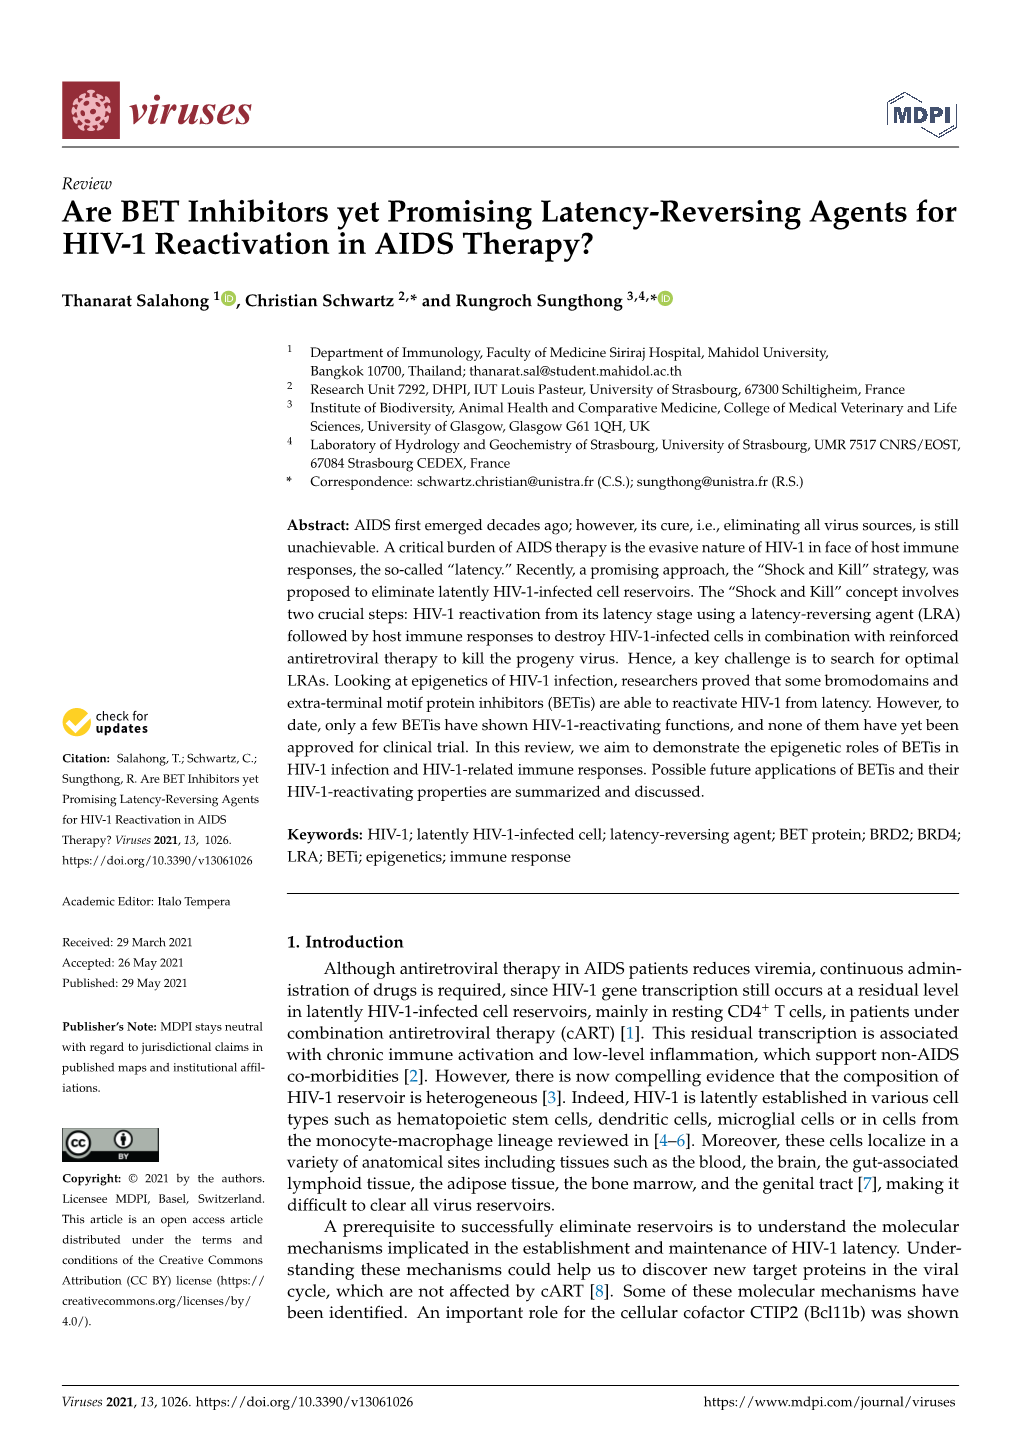 Are BET Inhibitors Yet Promising Latency-Reversing Agents for HIV-1 Reactivation in AIDS Therapy?